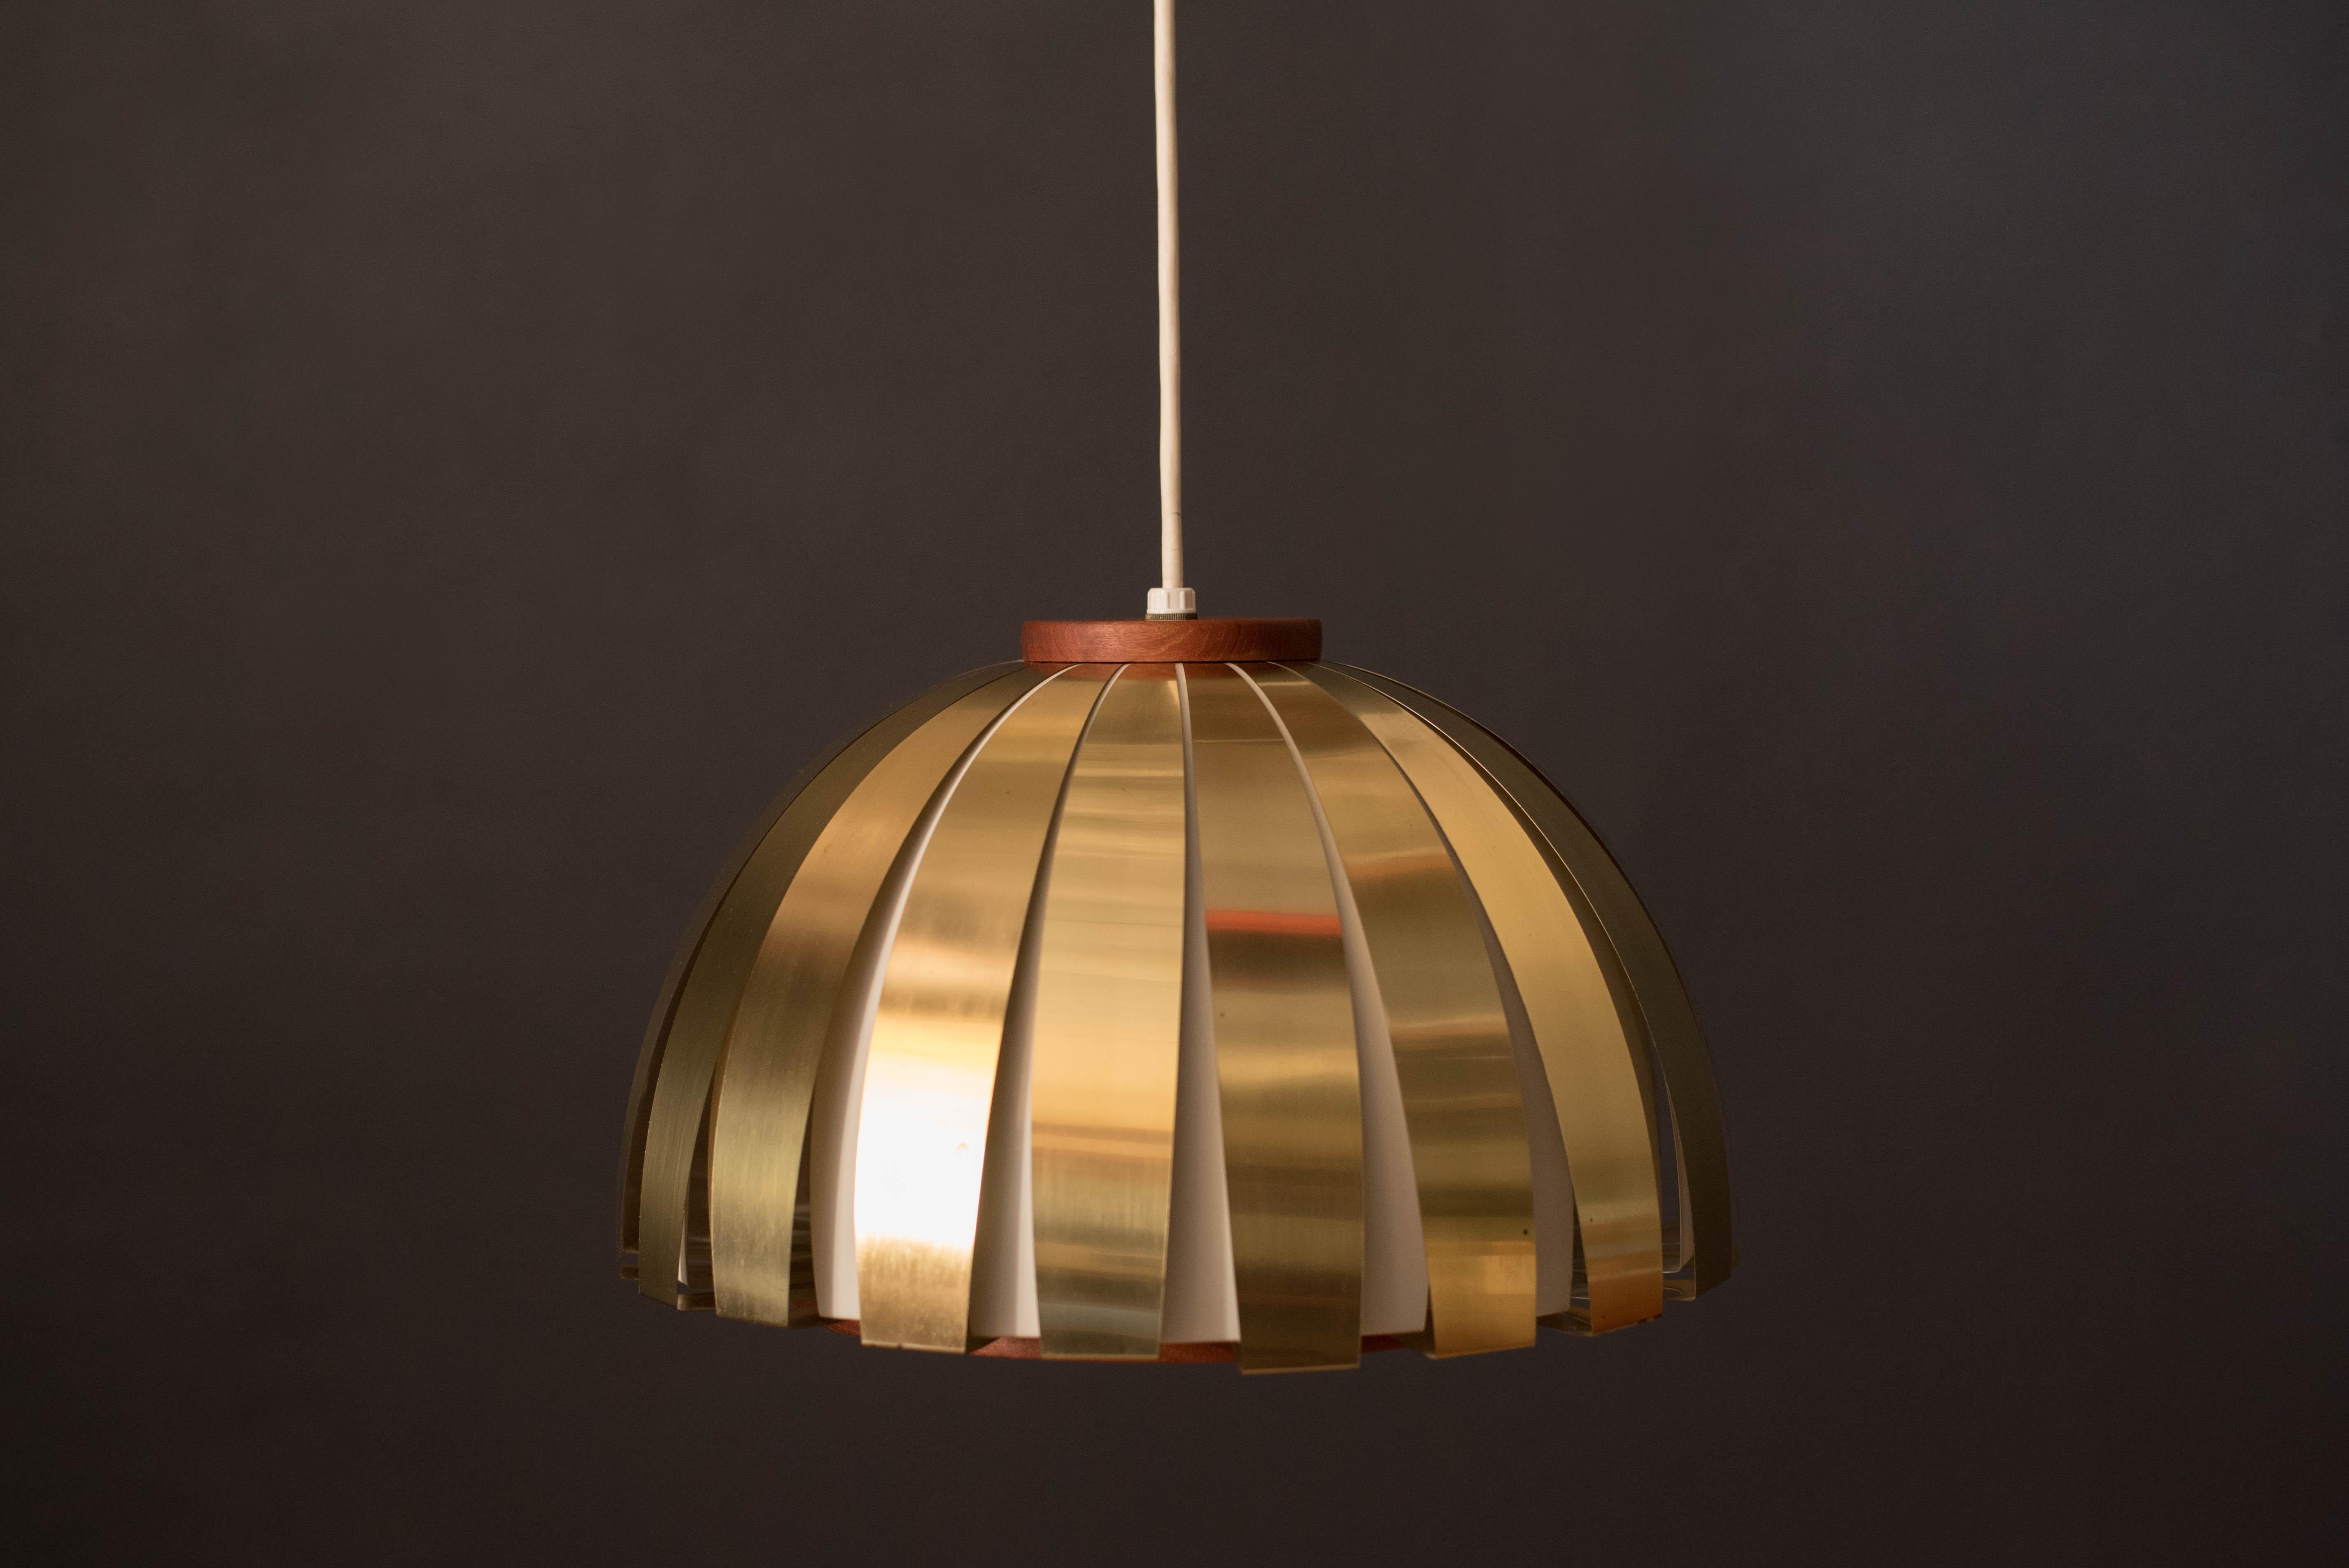 Mid Century Modern fiesta pendant lamp designed by Sven Aage Holm Sørensen for Holm Sørensen & Co., Denmark circa 1960's. This hanging light fixture features a rounded dome shape in brass and teak. The acrylic shade emits a warm glow that